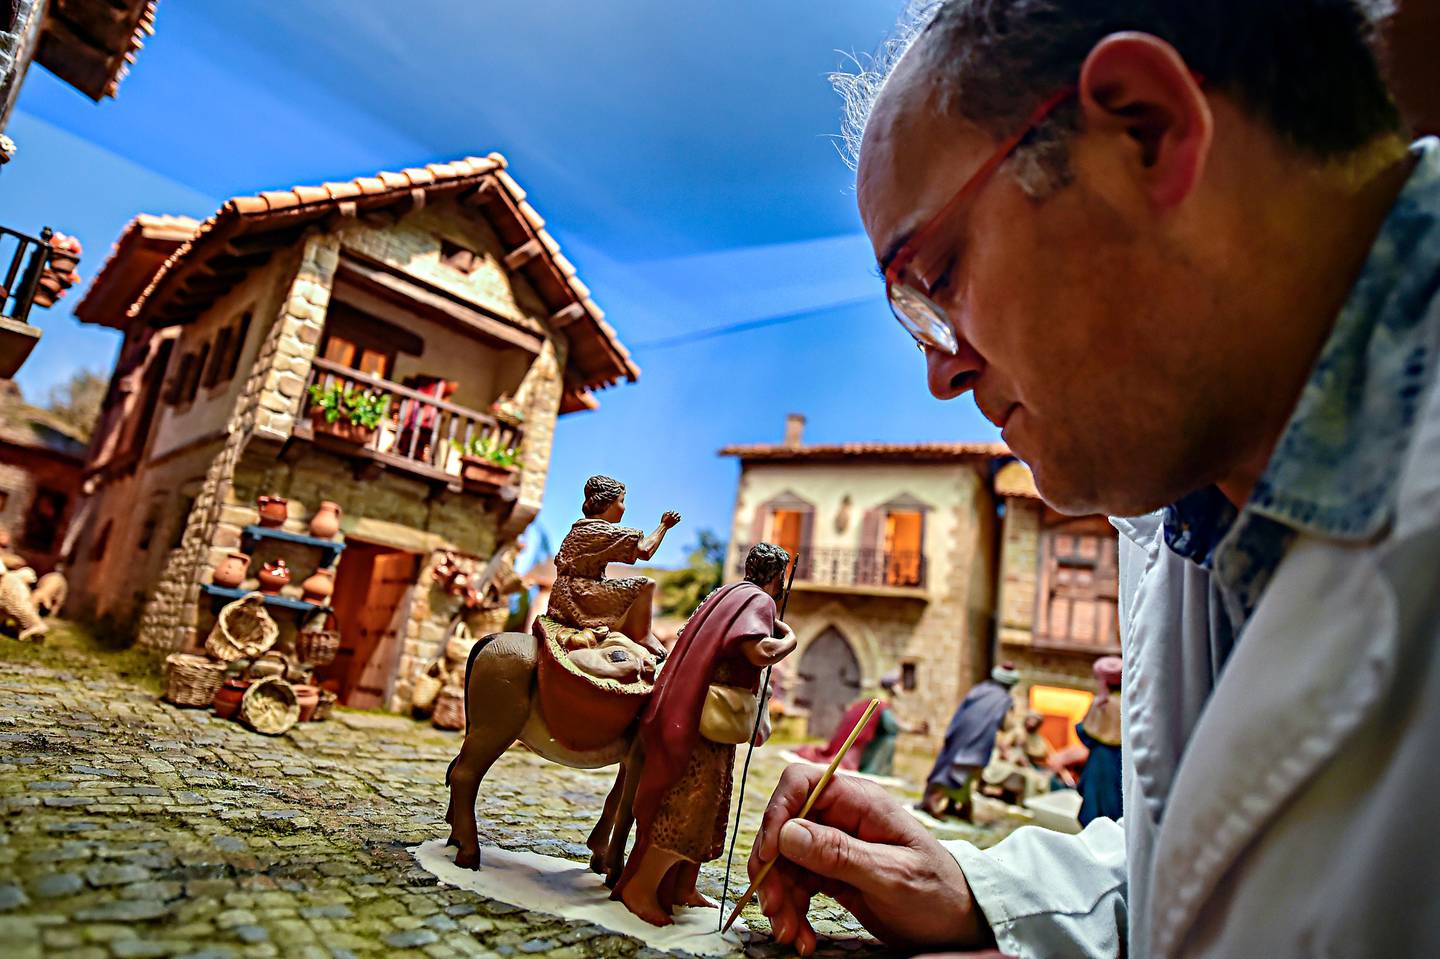 In this photo taken on Friday Nov. 30, 2018, a member of a nativity scene making group, adds the final touches to a nativity scene, known in Spain as ''Belenes'', in Pamplona, northern Spain. Spain celebrates the Christmas season with ancient Catholic traditions including the "Belenes", which are handmade from polystyrene and decorated with small nativity figures. (AP Photo/Alvaro Barrientos)